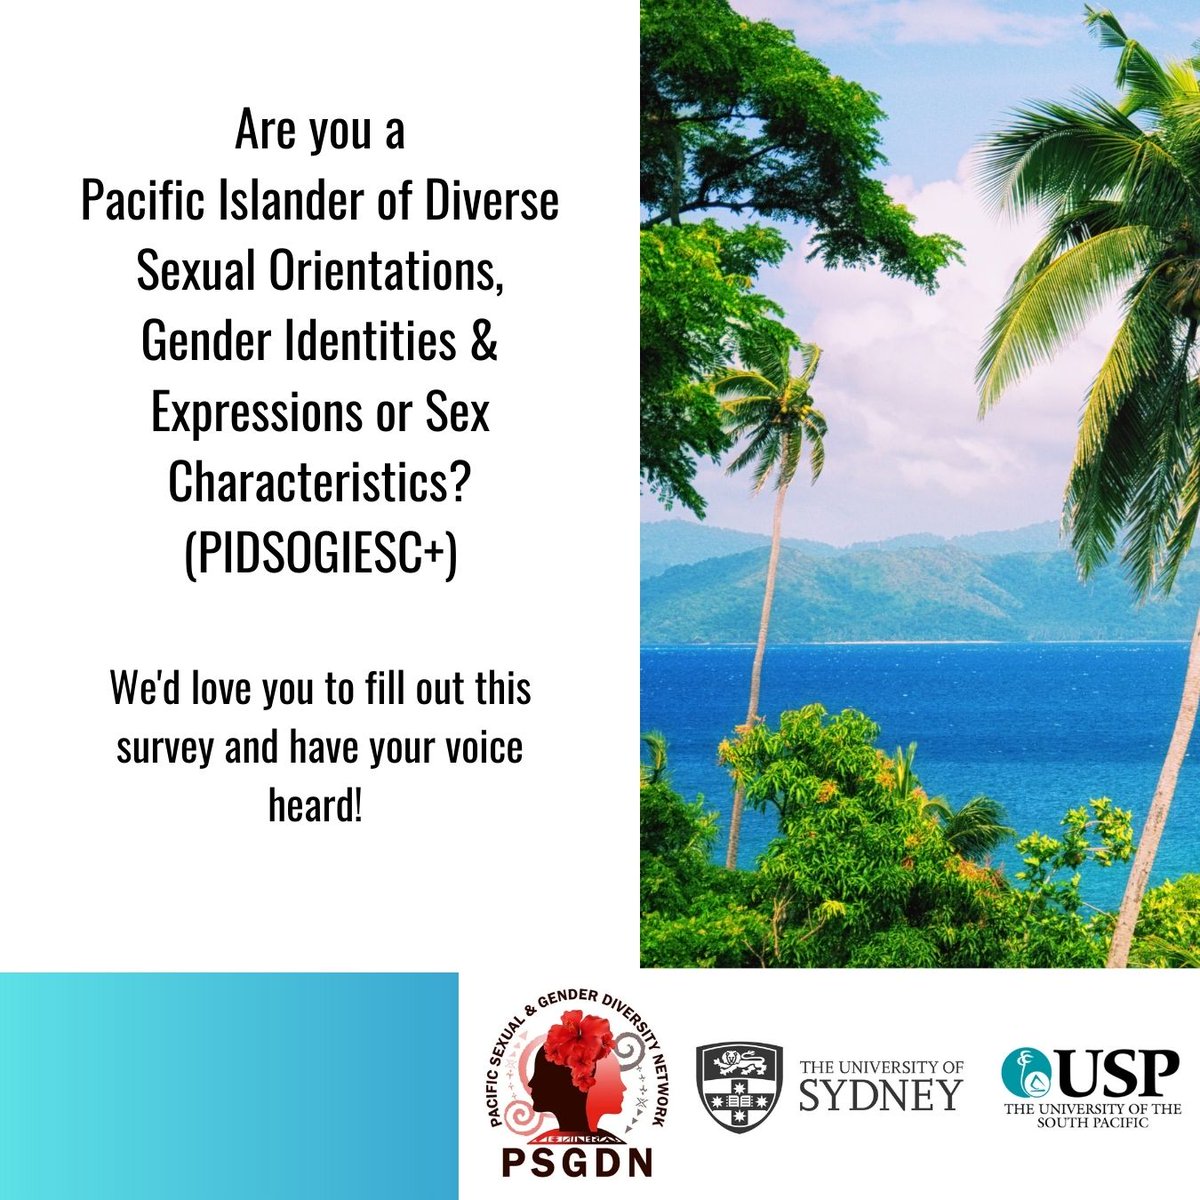 CALLING all PIDSOGIESC+ peoples! Have your voice heard & included via our survey available here shorturl.at/eirsF. Your feedback will help shape a safer, more inclusive society across the Pacific 💕🌴#LivedExperience #Moana #Perspectives 🏳️‍🌈🏳️‍⚧️ @USyd_SSESW @UniSouthPacific